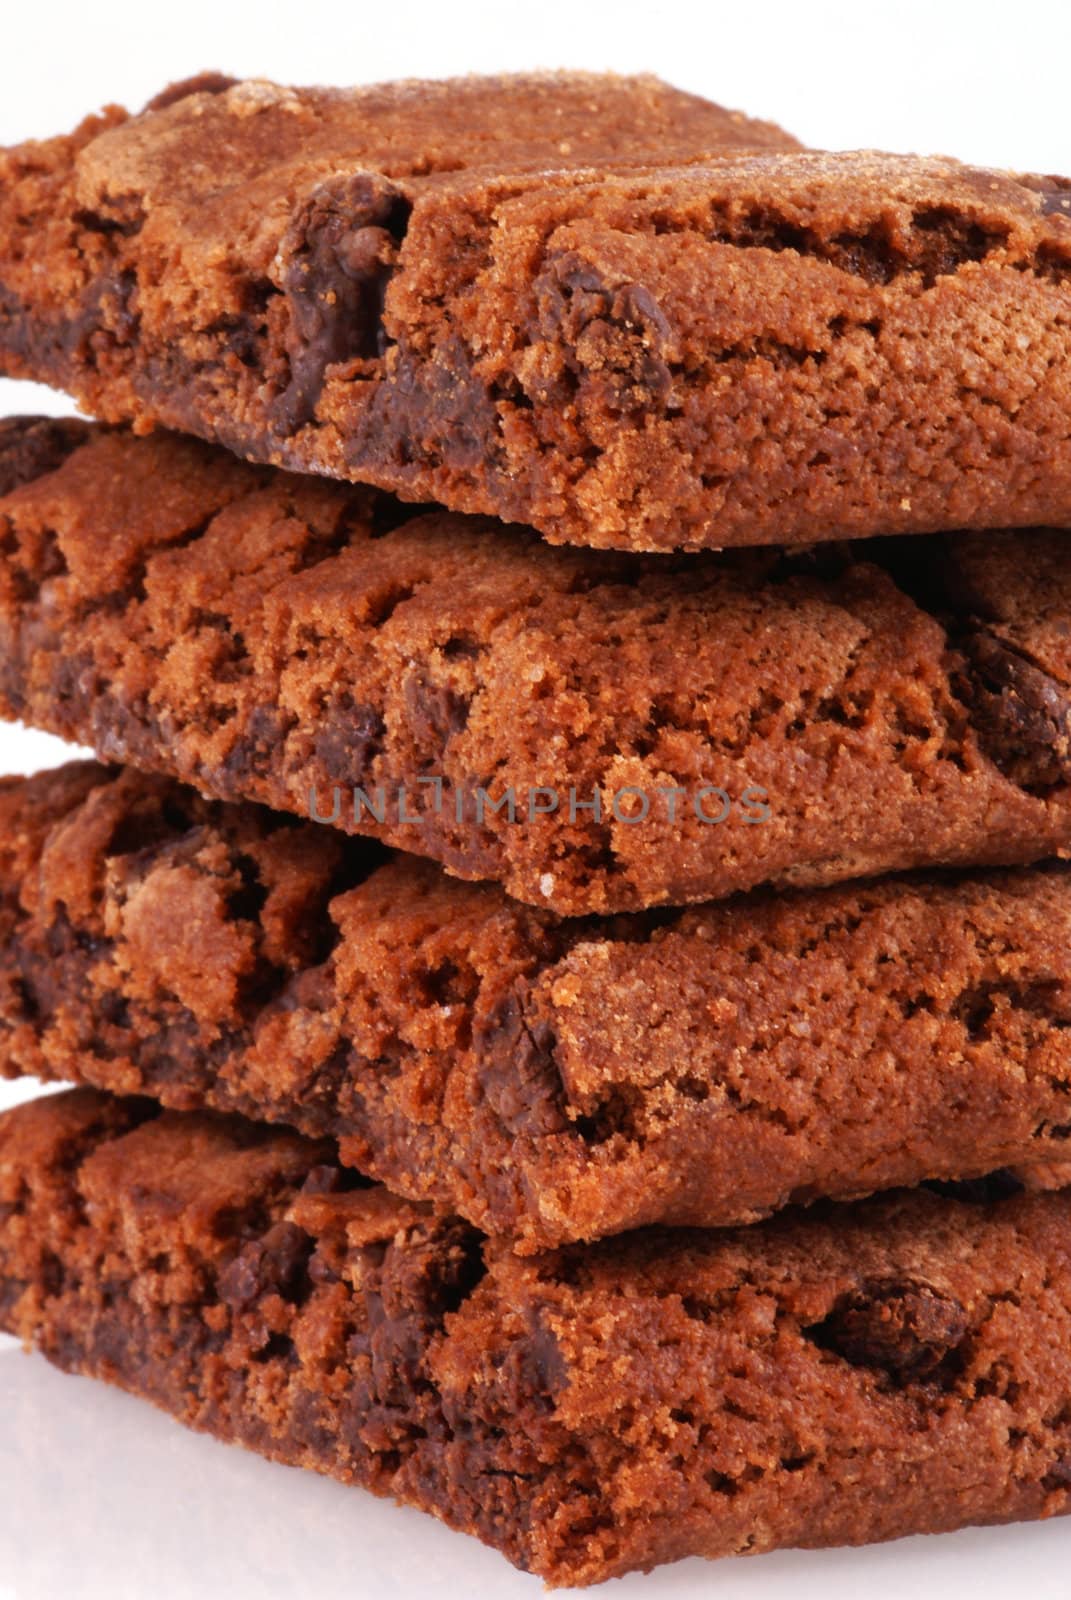 Close up of a pile of chocolate cookies on white.